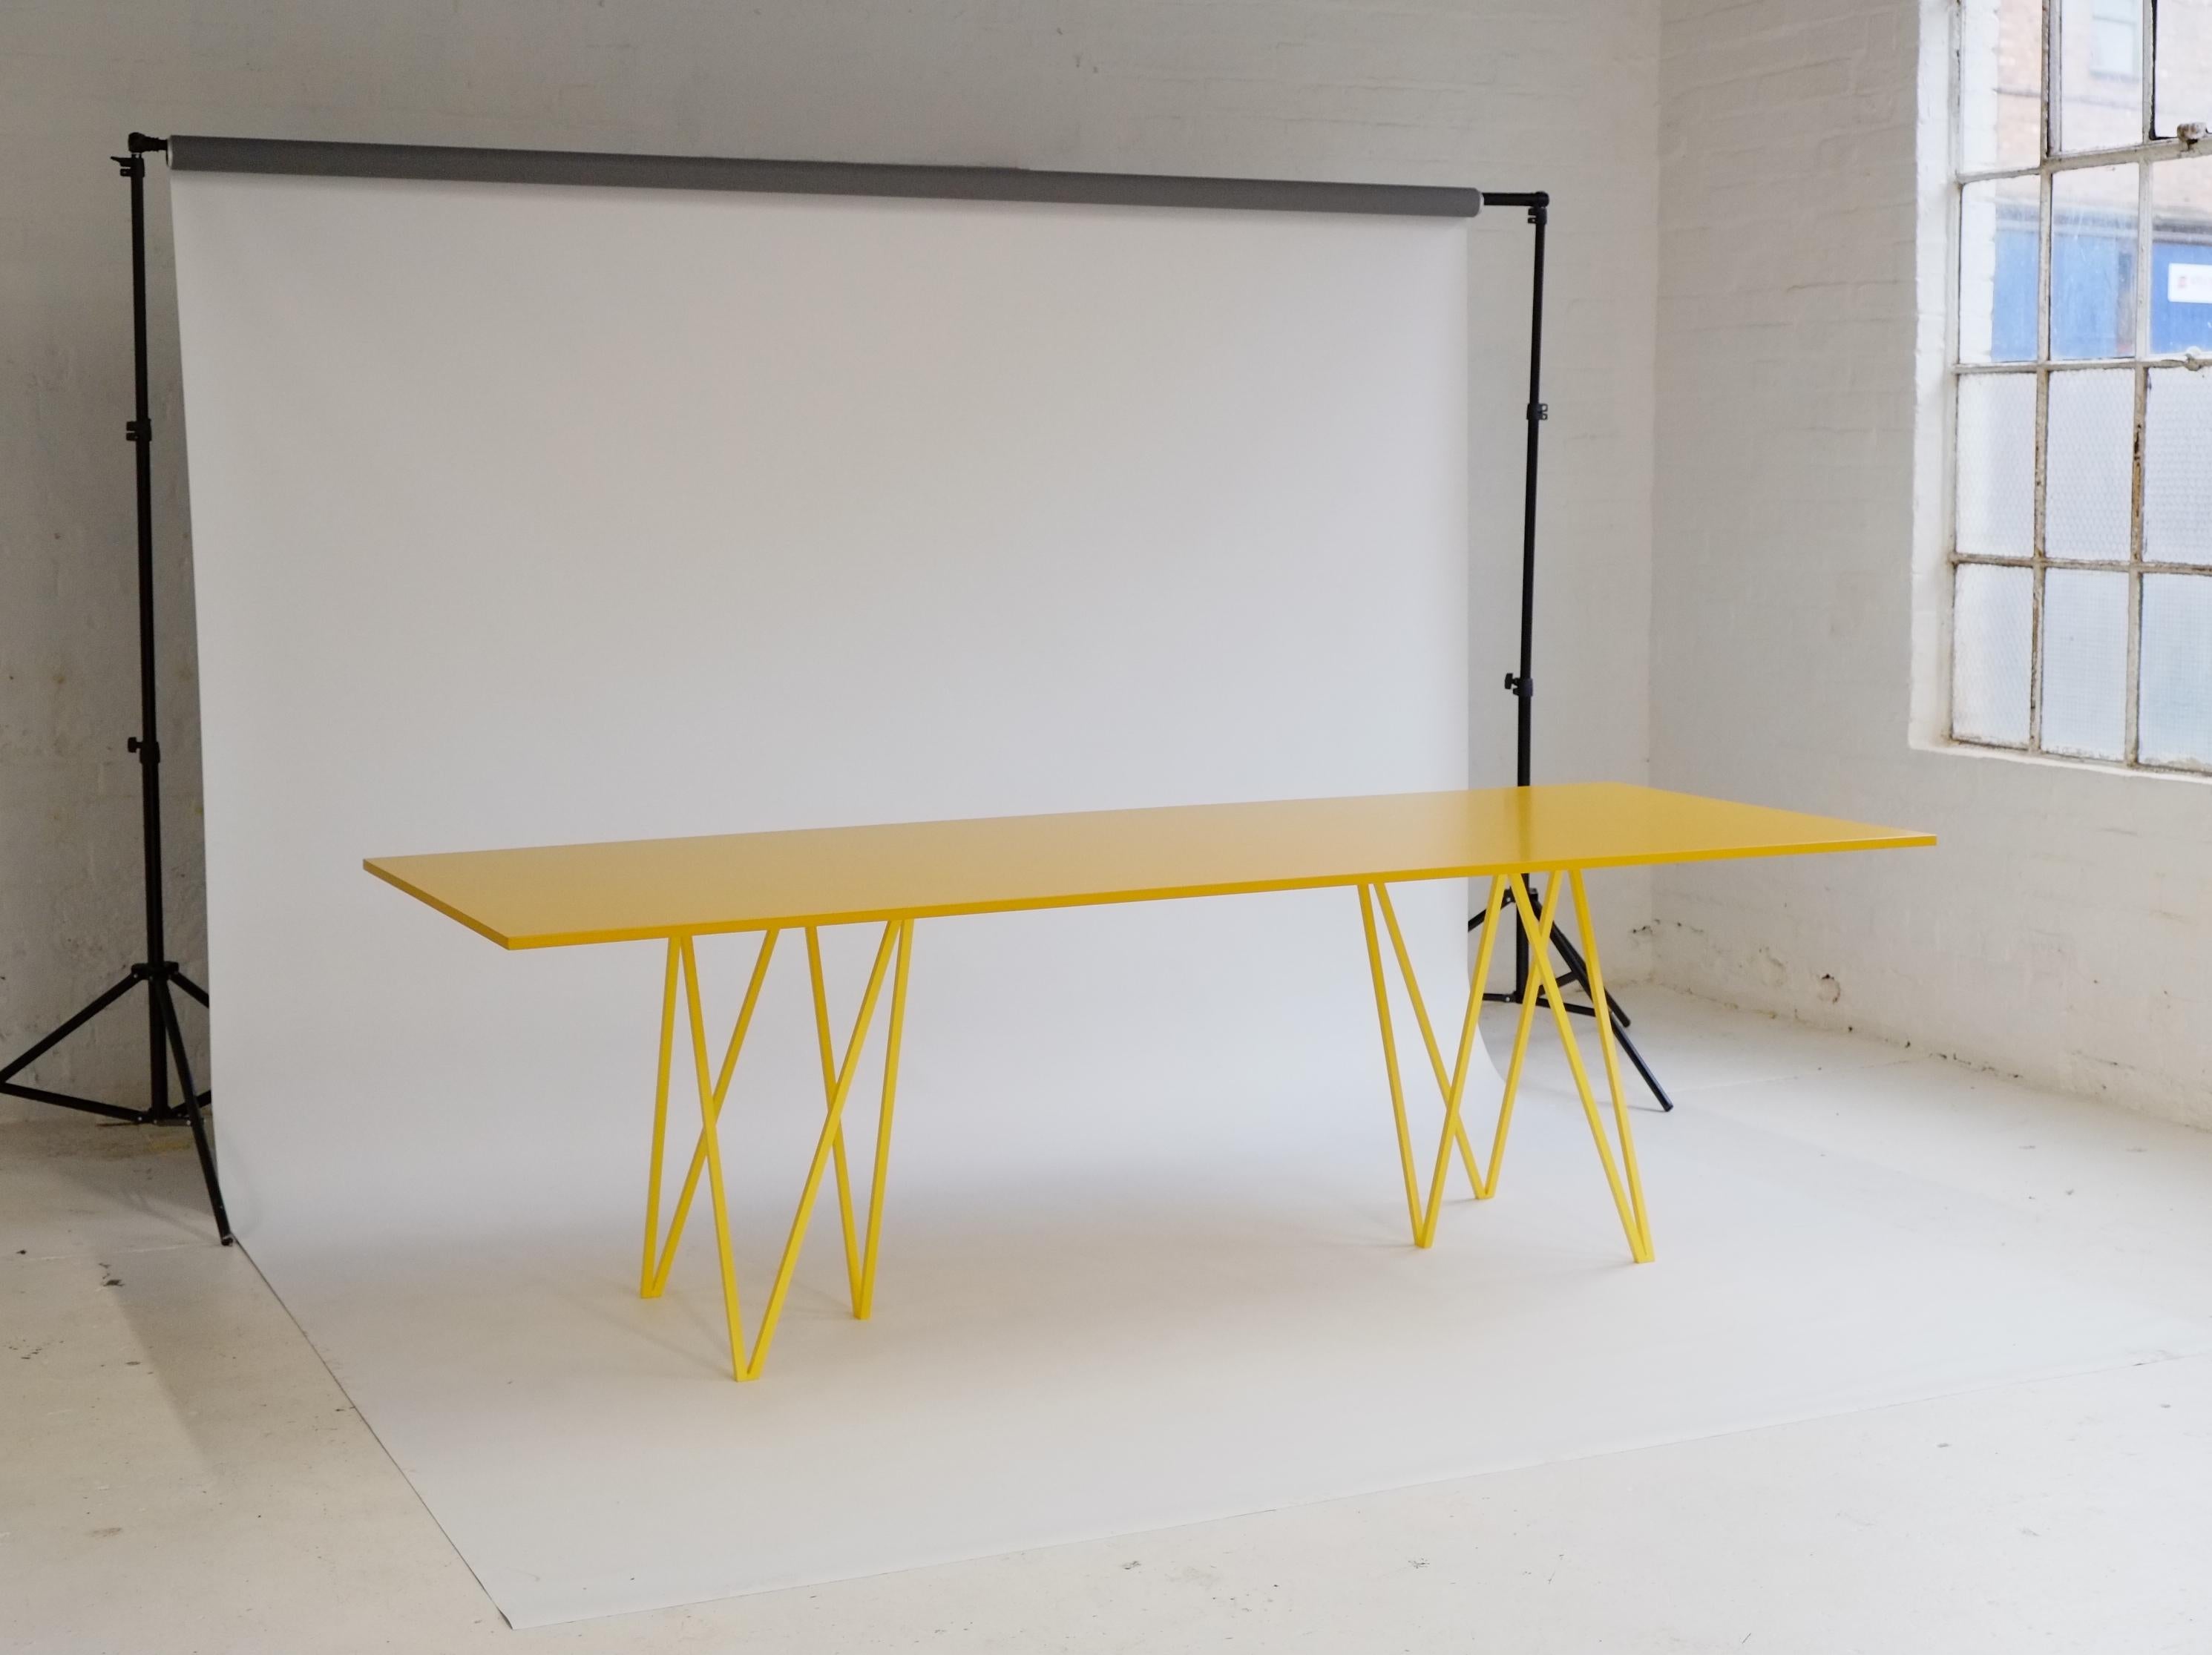 The ZigZag dining table is a bold and elegant statement piece.

This ZigZag dining table is made with bright yellow powder coated, solid steel zigzag legs with a contrasting yellow lacquered table top. The table top is finished with a food safe